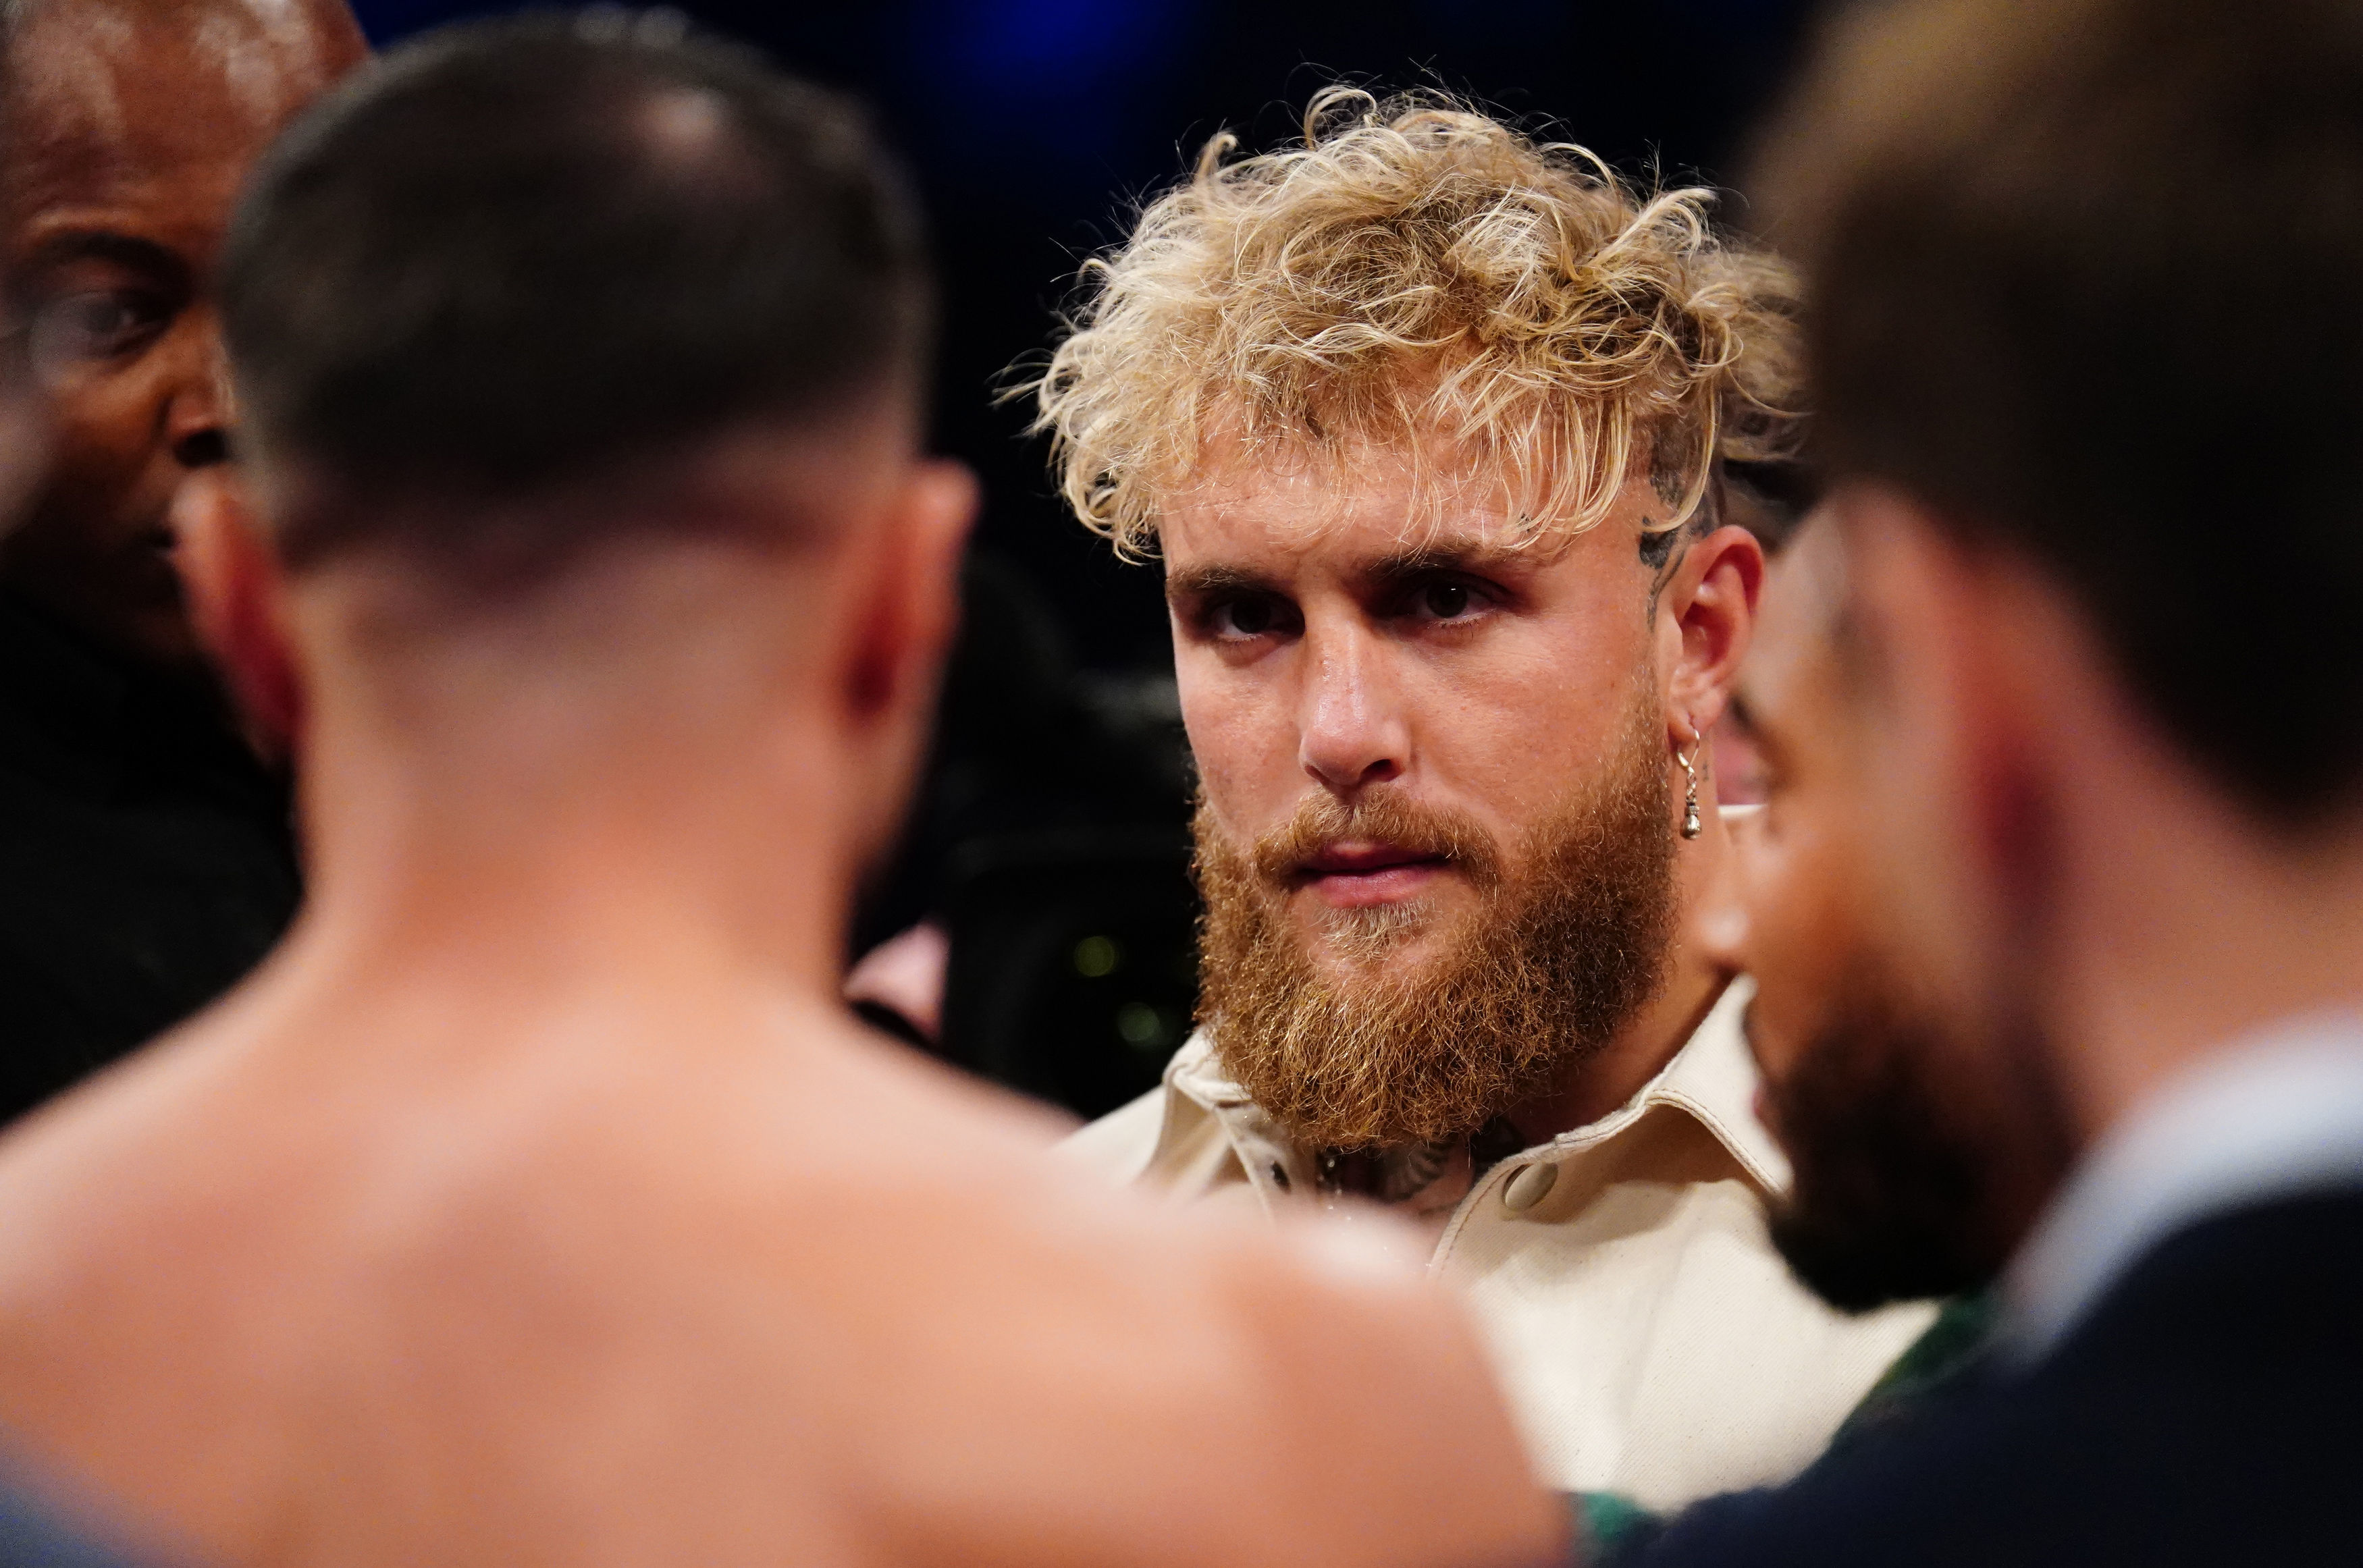 , Jake Paul and Tommy Fury could be lined up for blockbuster rematch due to contract clause for Saudi Arabia grudge match